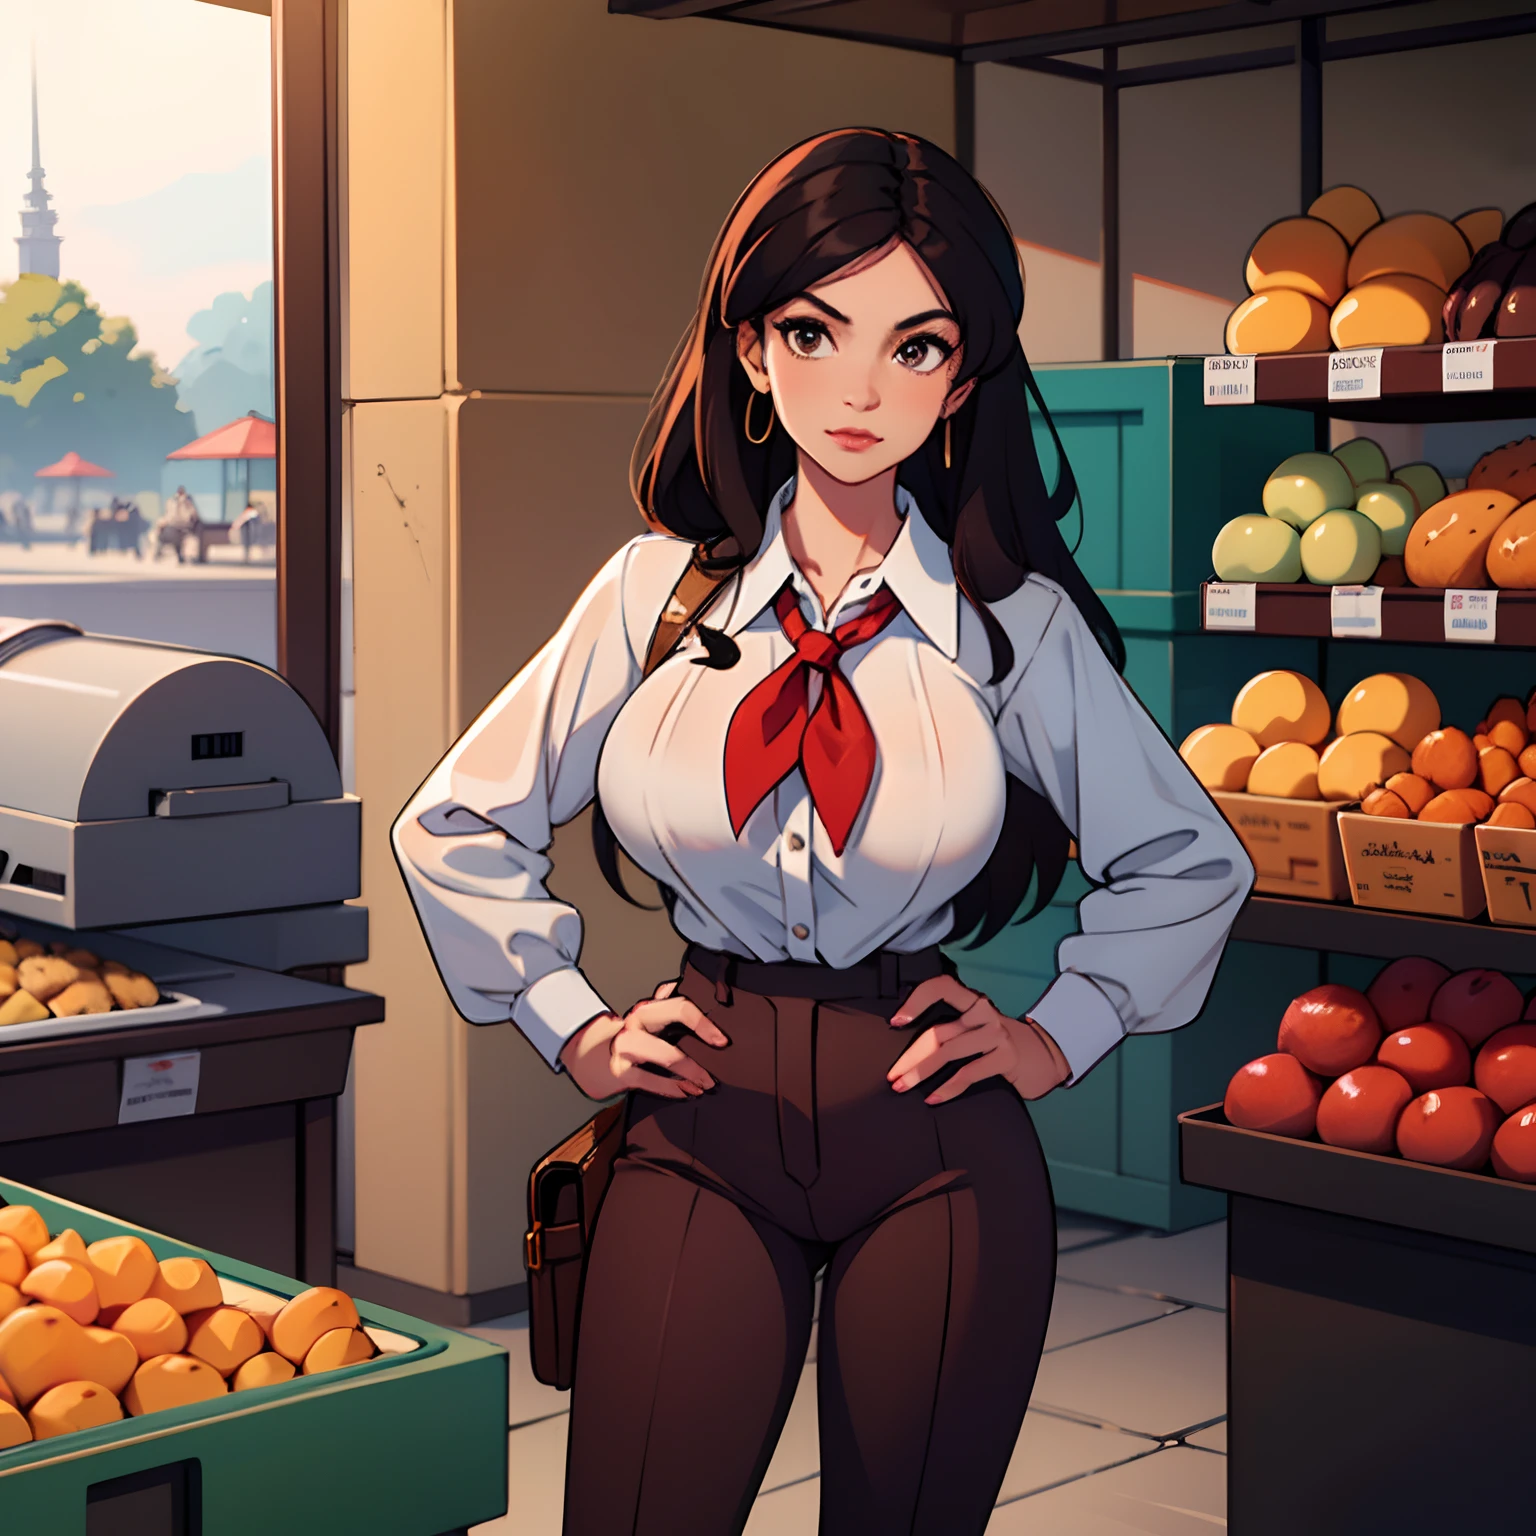 Denise milani, solo, tan skin, brown hair, long hair, 20s style adventurer outfit, torso up, looking at viewer, white pinstripe button shirt, red neckerchief, thinking, looking up, hand on chin, brown pants, gun strapped to hip, standing in front of Brazilian market, vendors,